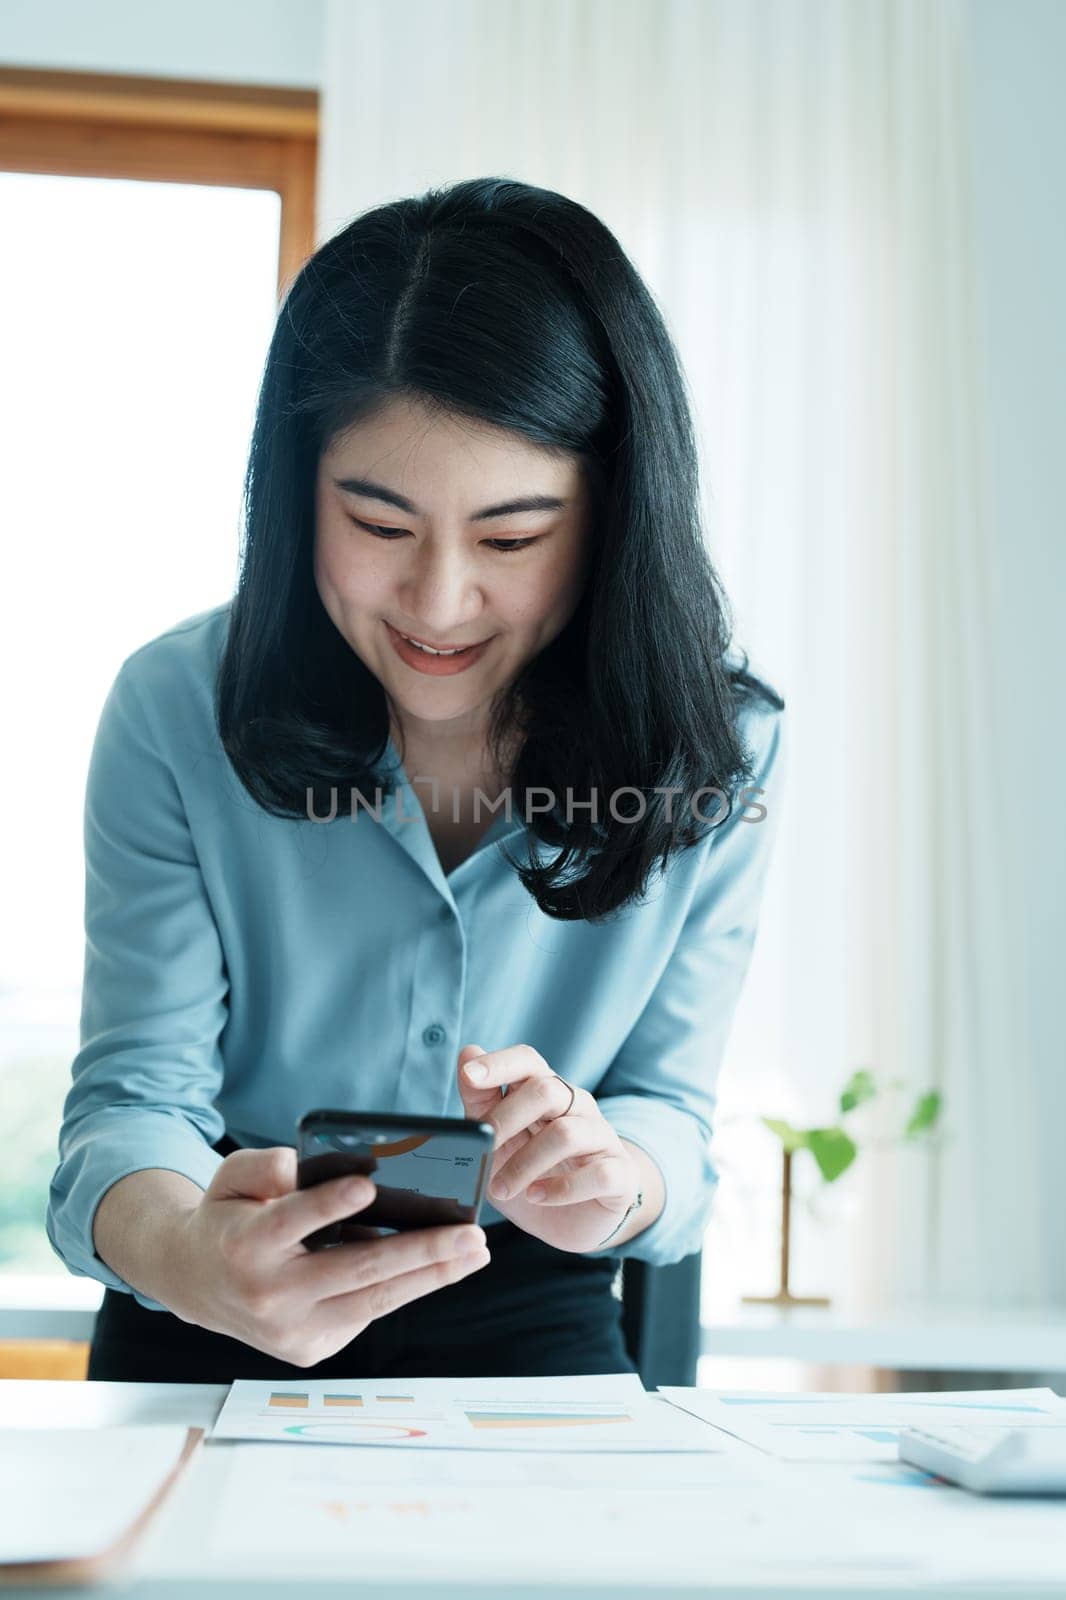 Portrait of a young Asian woman showing a smiling face as she uses her phone, and financial documents on her desk in the early morning hours by Manastrong